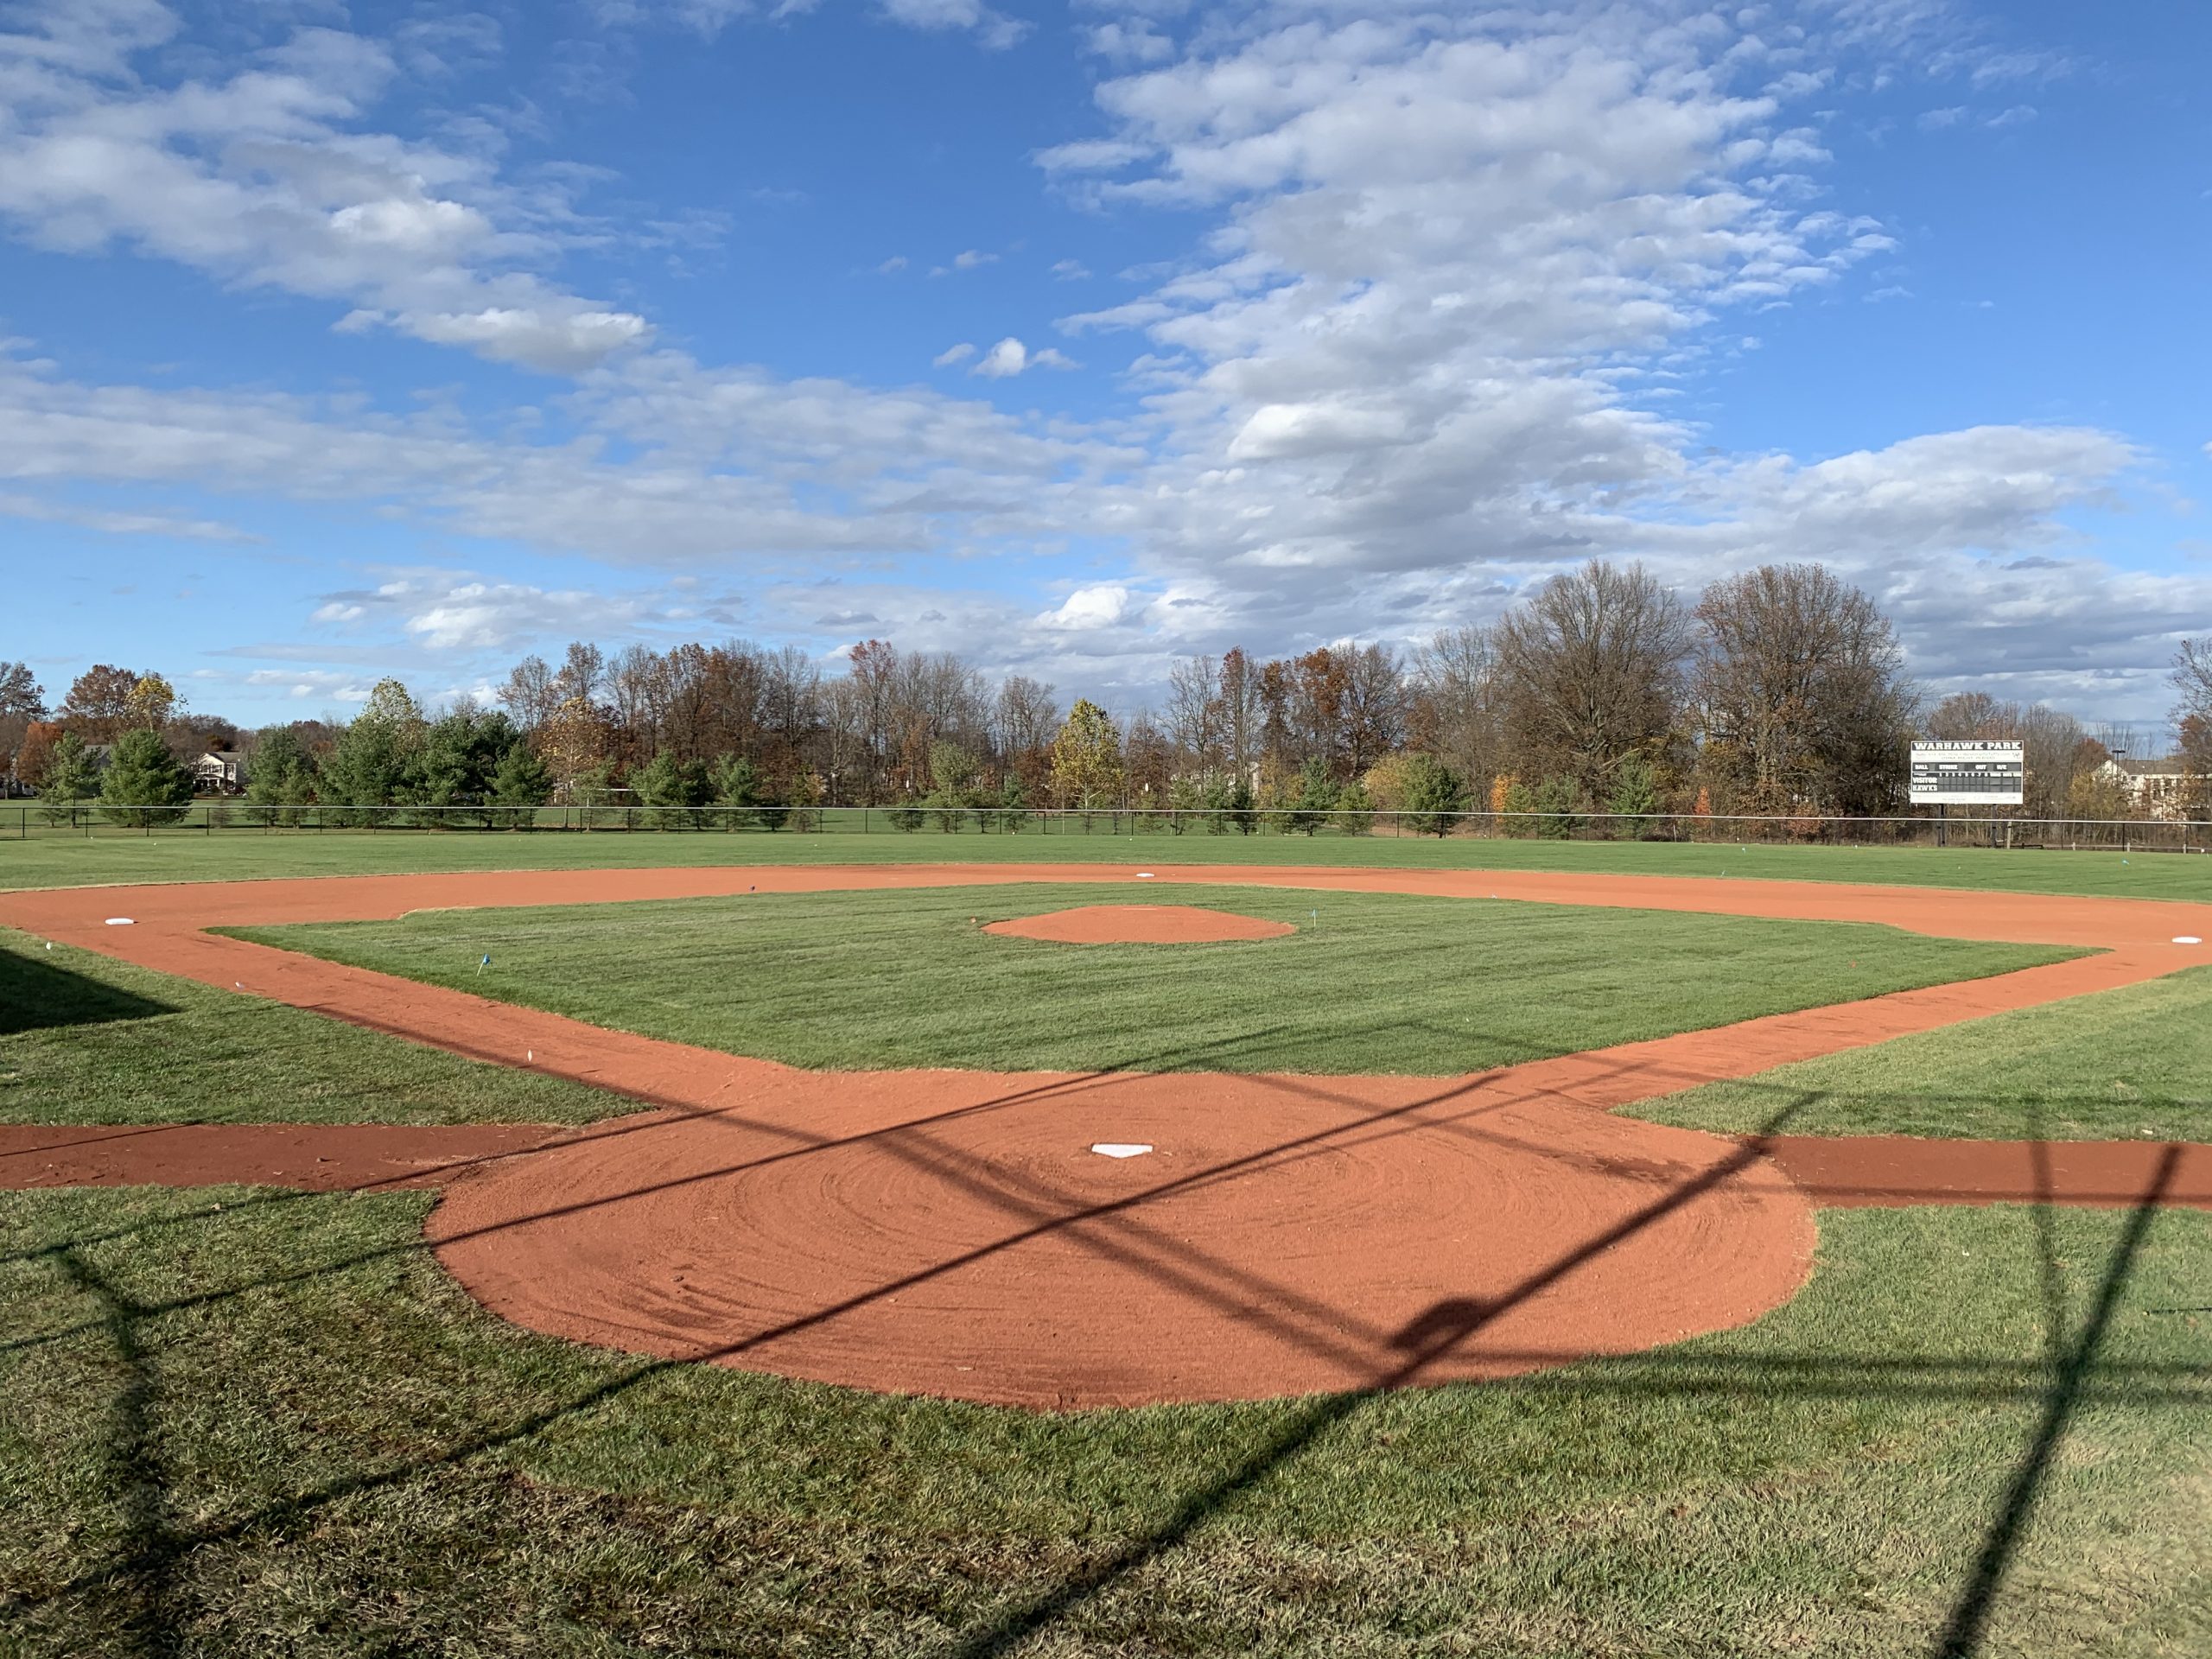 Basesball field with reddish infield skin and clean edges